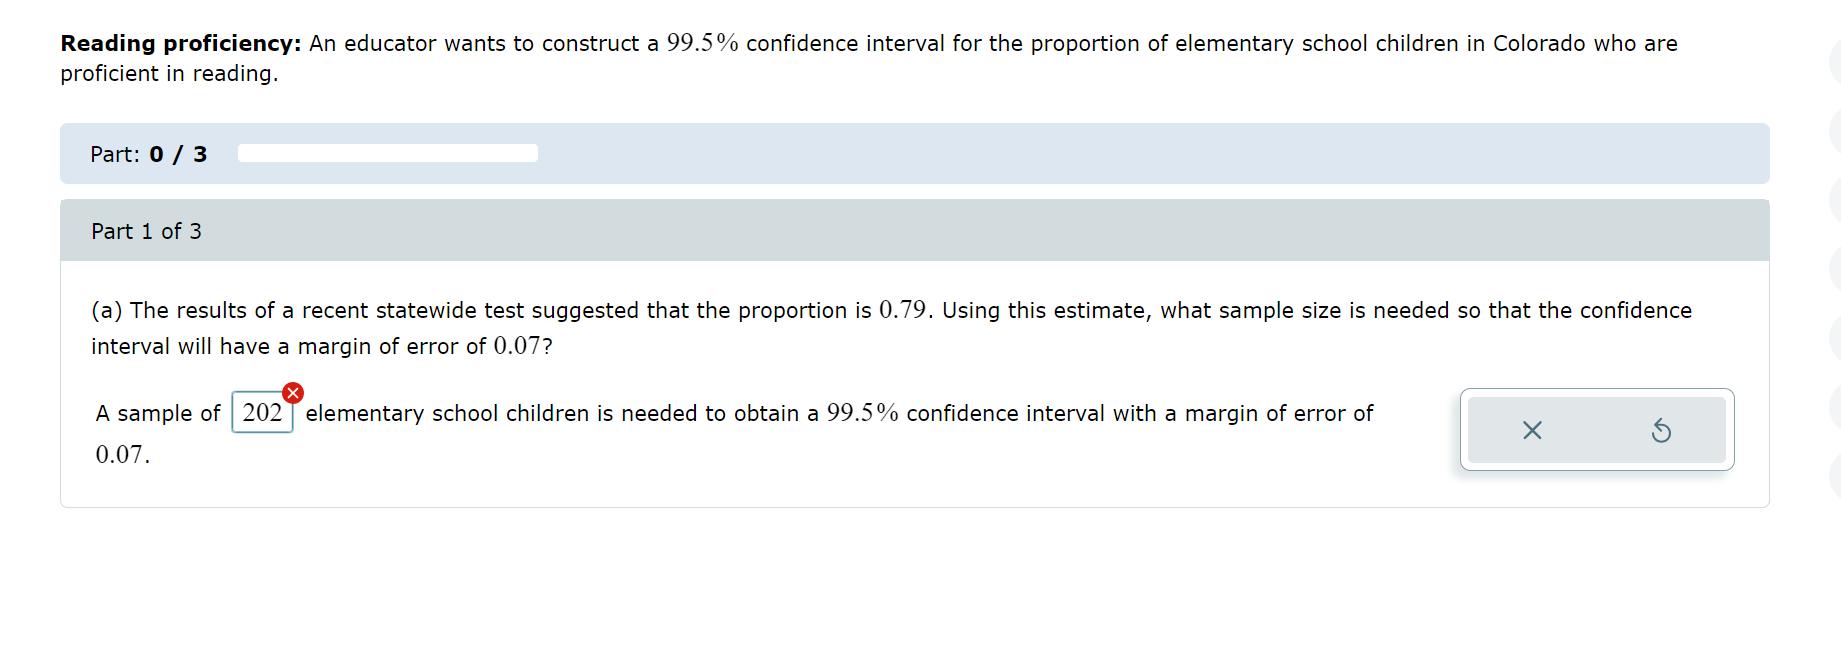 Reading proficiency: An educator wants to construct a 99.5% confidence interval for the proportion of